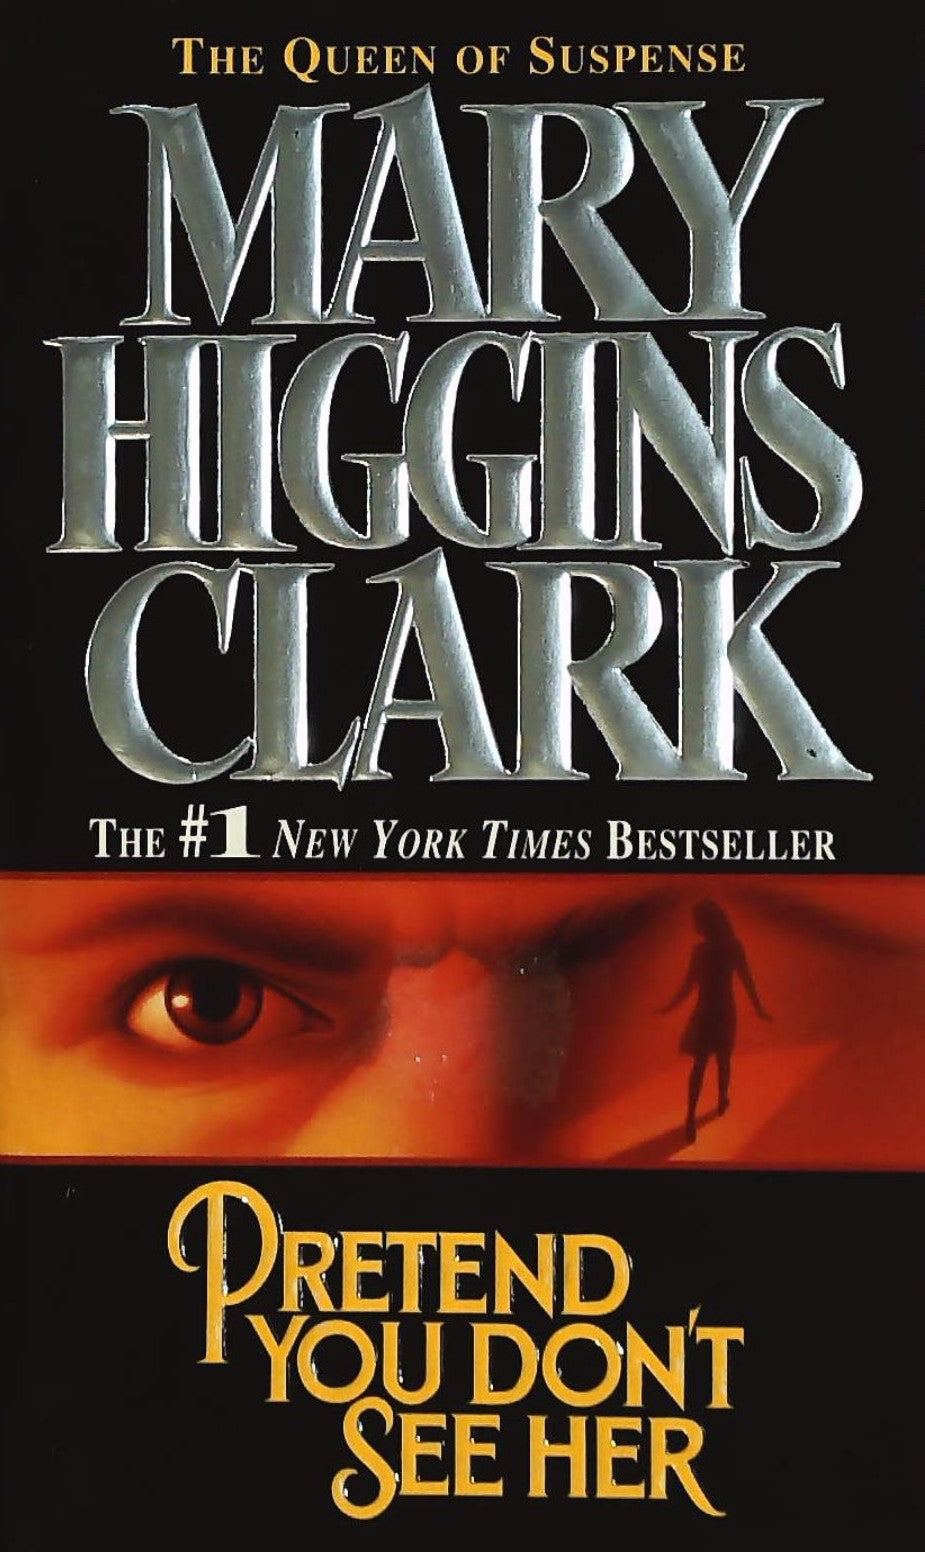 Livre ISBN 0671867156 Pretend you don't see her (Mary Higgins Clark)